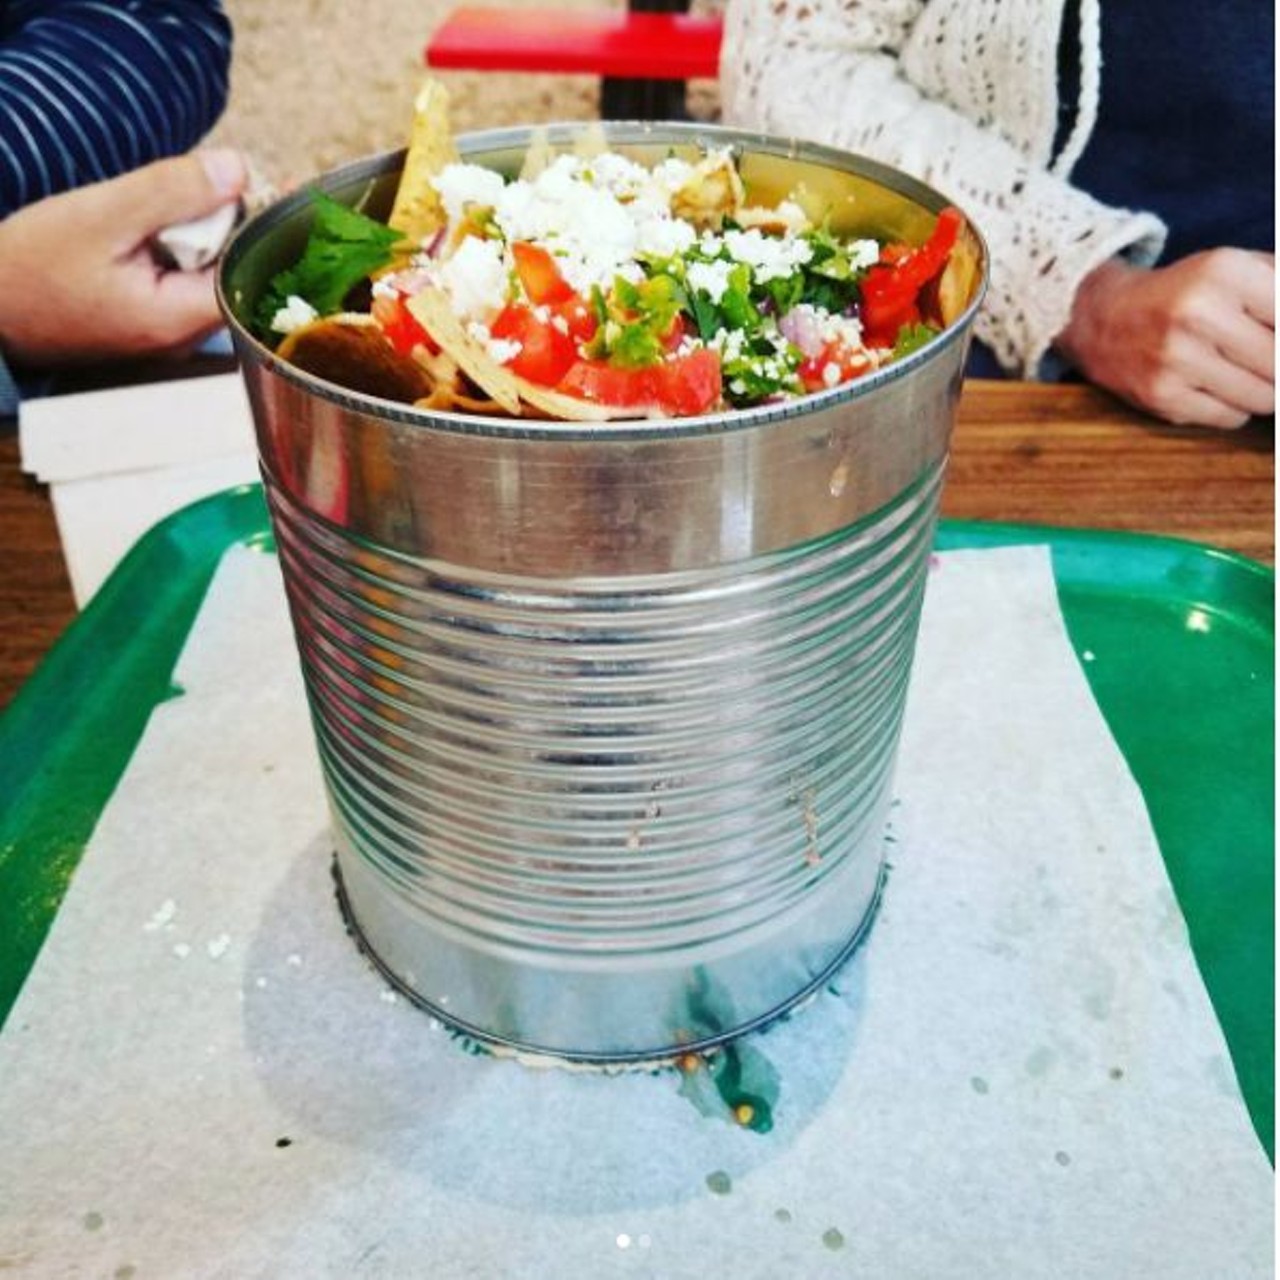 Tin Can Nachos at Viva Tacoland
103 W Grayson St, (210) 368-2443
Because you won&#146;t care that your food is coming out of a giant can when you&#146;re high AF.
Photo via Instagram, myrts08